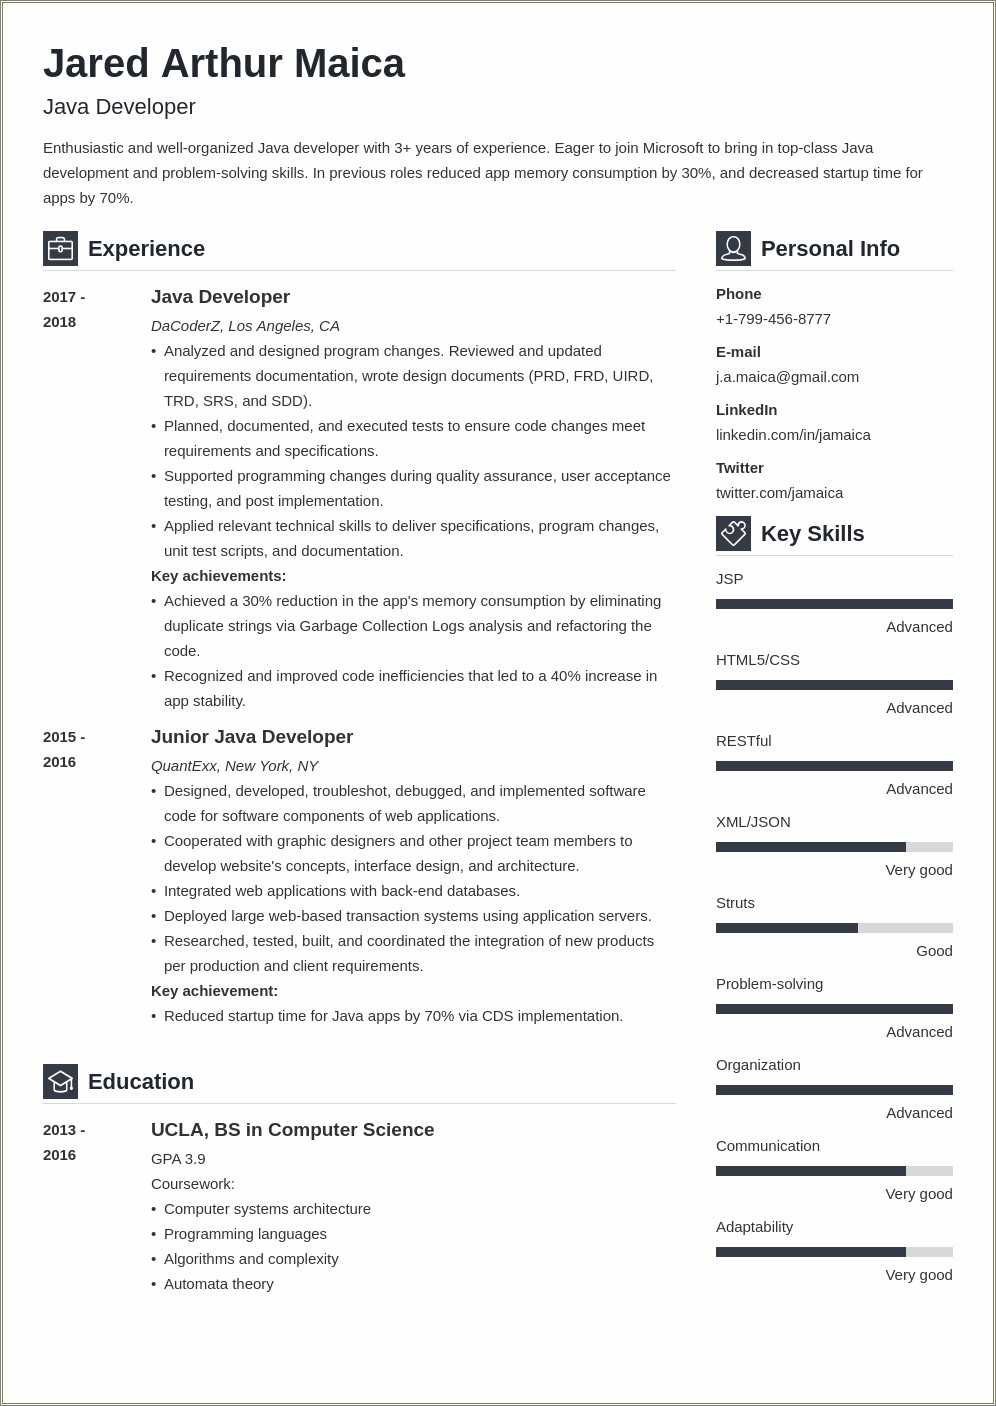 Java Developer Resume With 5 Years Experience